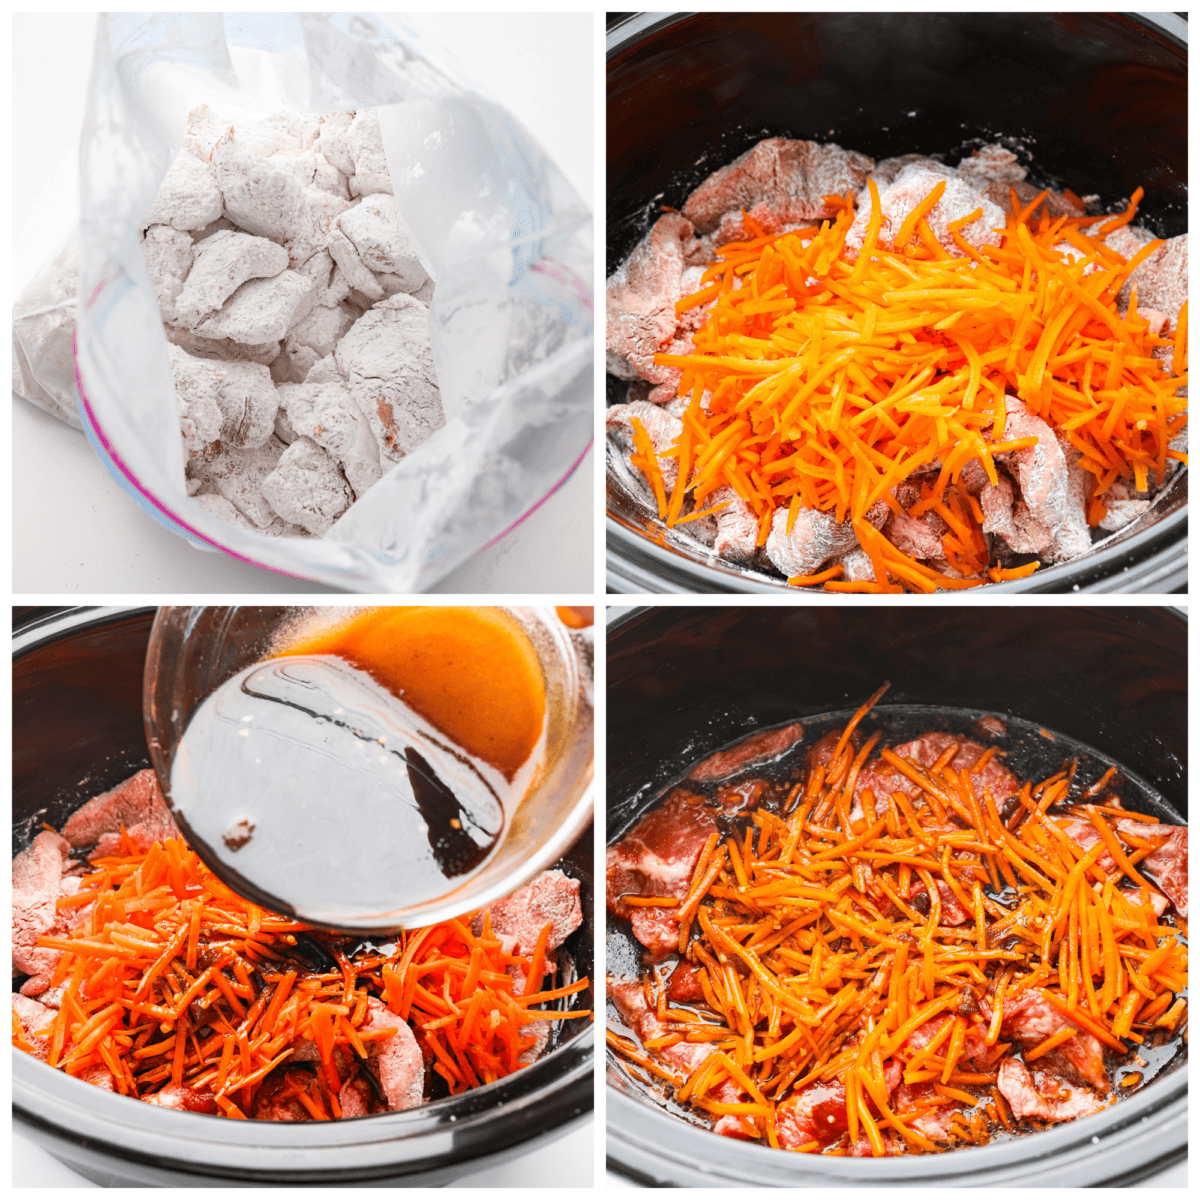 First photo of the beef and cornstarch tossed together in a plastic bag. Second photo of cornstarch coated beef and shredded carrots in a crockpot. Third photo of the sauce pouring in the crockpot. Fourth photo of the beef, carrots, and sauce in a crockpot.